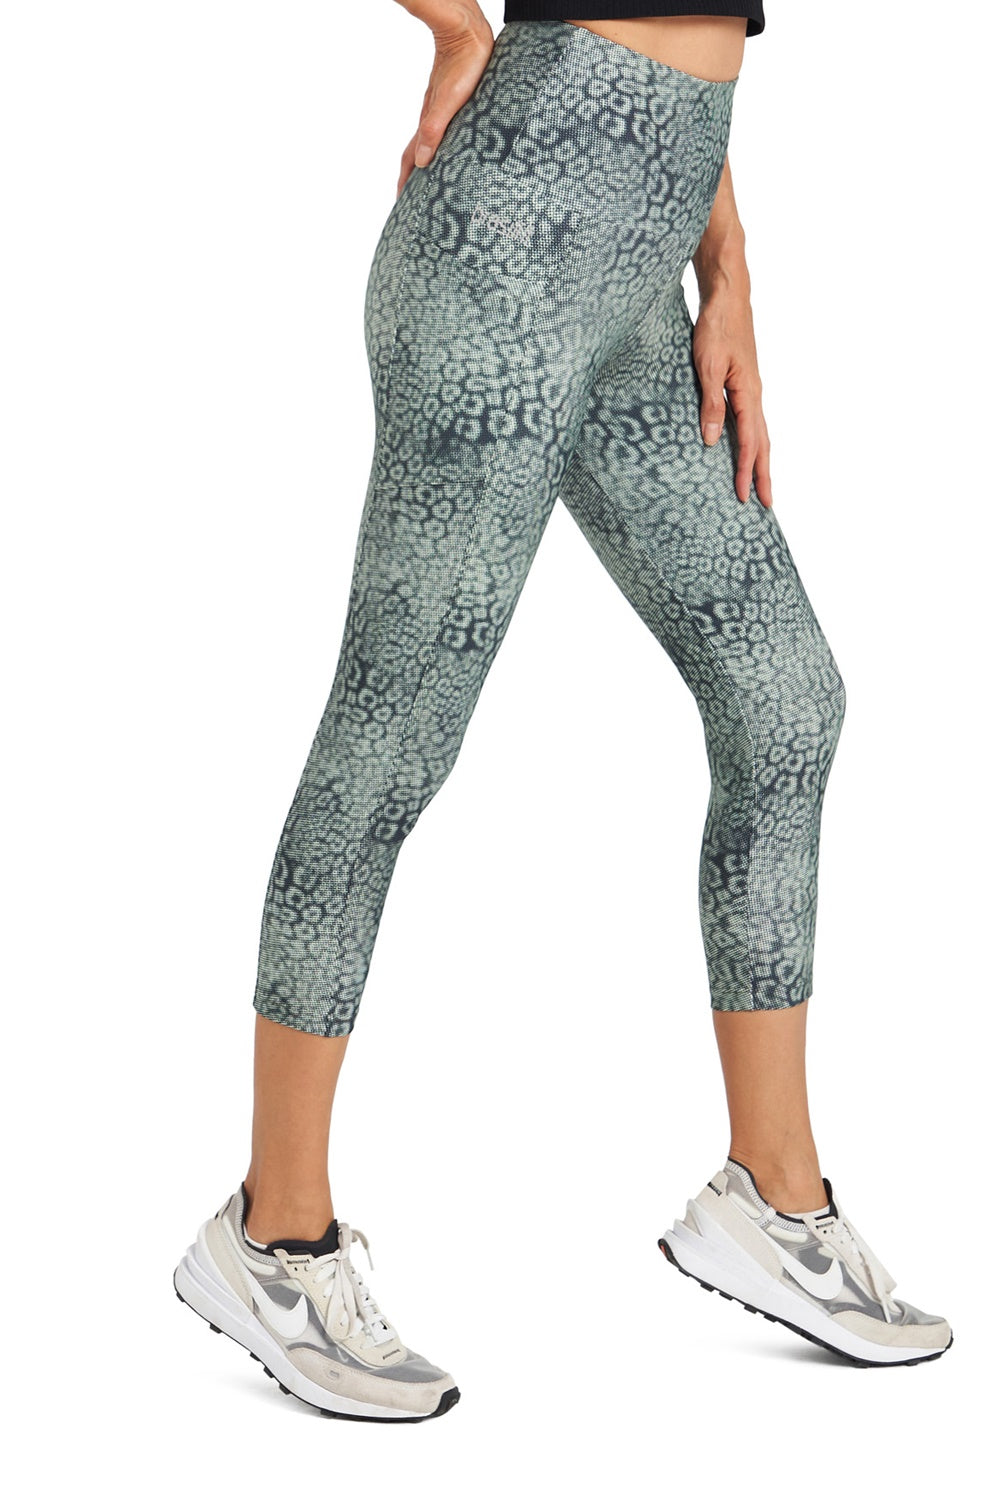 Karla High Waisted  Mid Calf Legging with Pockets